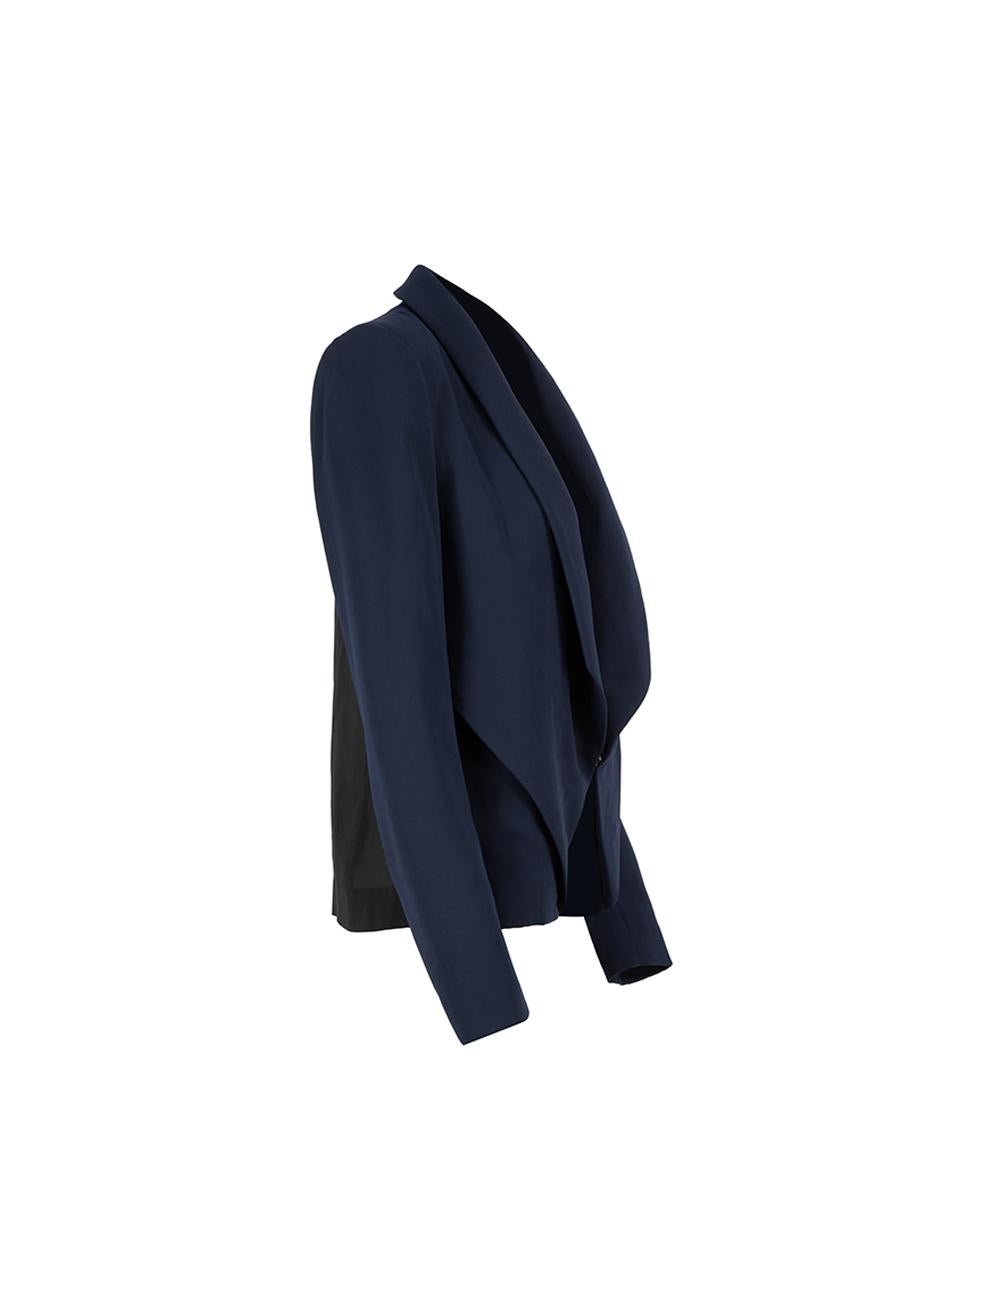 CONDITION is Very good. Minimal wear to blazer is evident. Minimal wear to the right shoulder where a light mark can be seen on this used Dion Lee designer resale item.  Details  Navy and black Synthetic Blazer Hook and eye front closure Shoulder